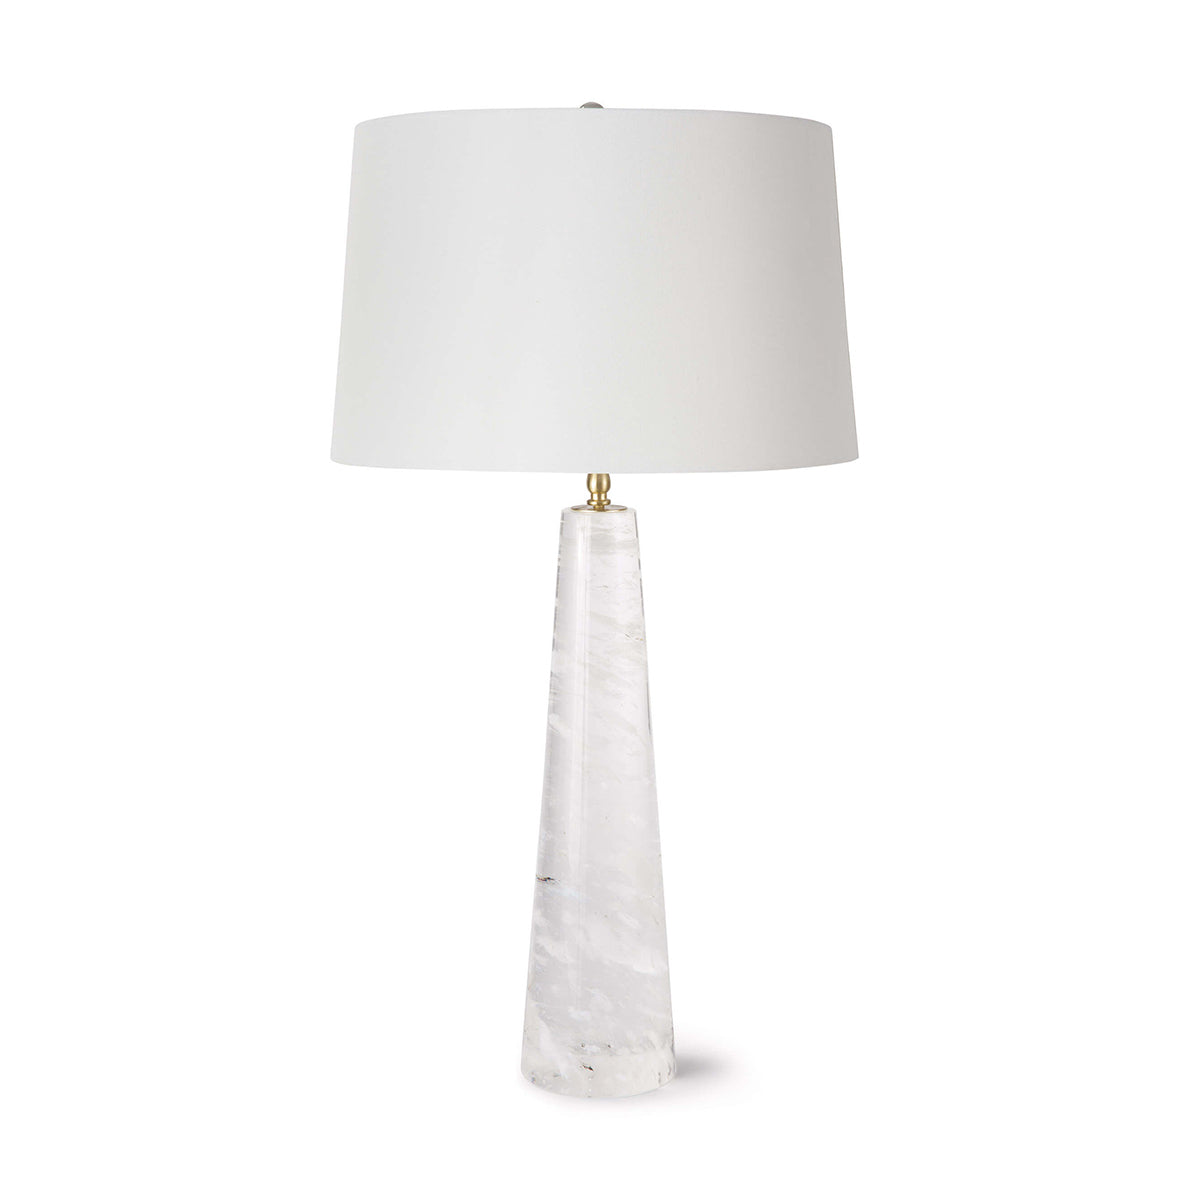 ODESSA CRYSTAL TABLE LAMP CLEAR